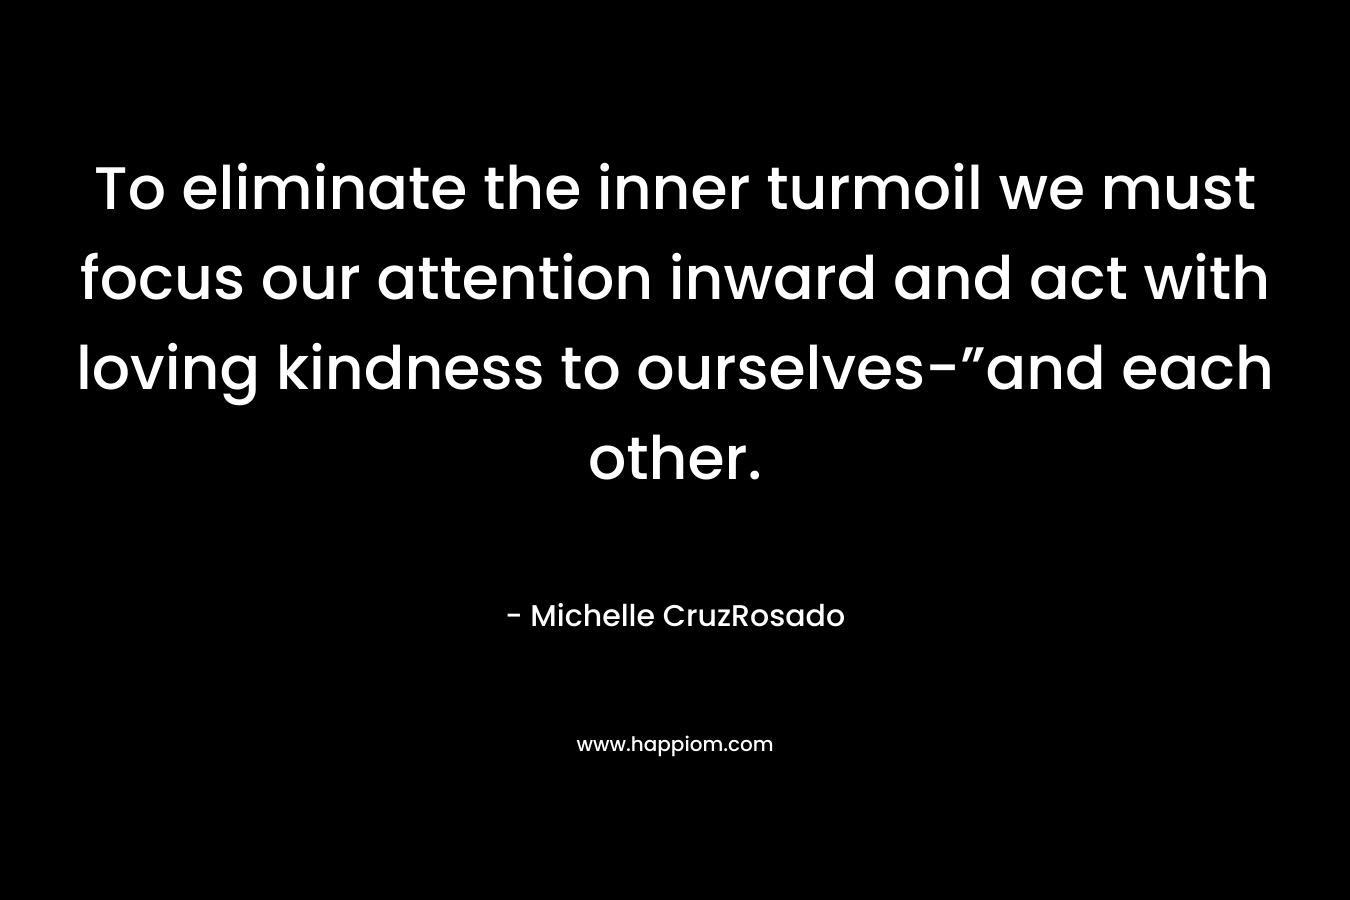 To eliminate the inner turmoil we must focus our attention inward and act with loving kindness to ourselves-”and each other.